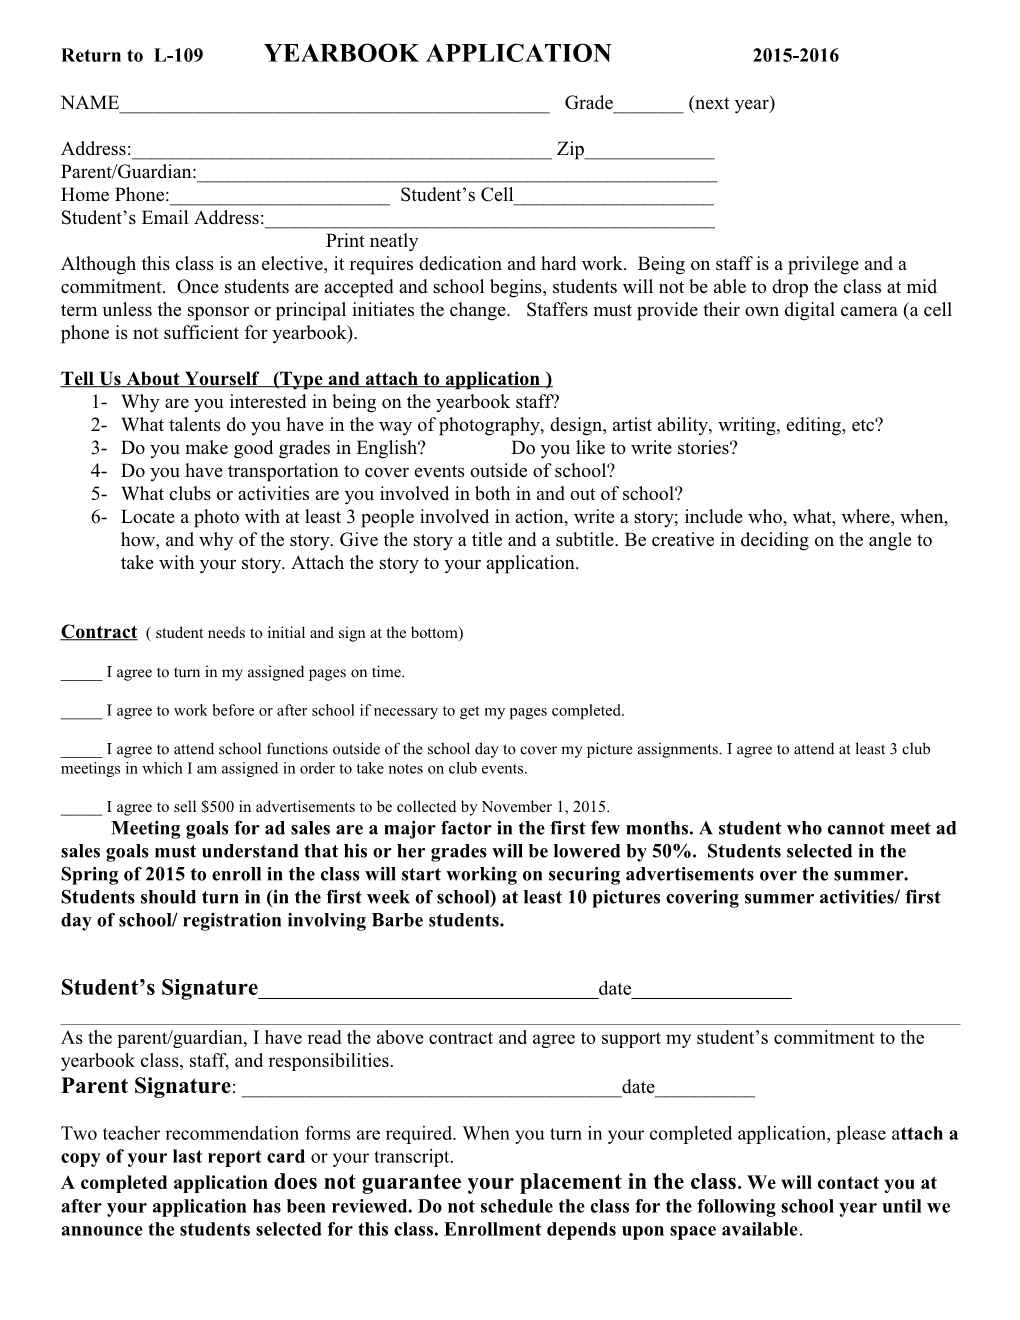 Return to L-109 YEARBOOK APPLICATION 2015-2016